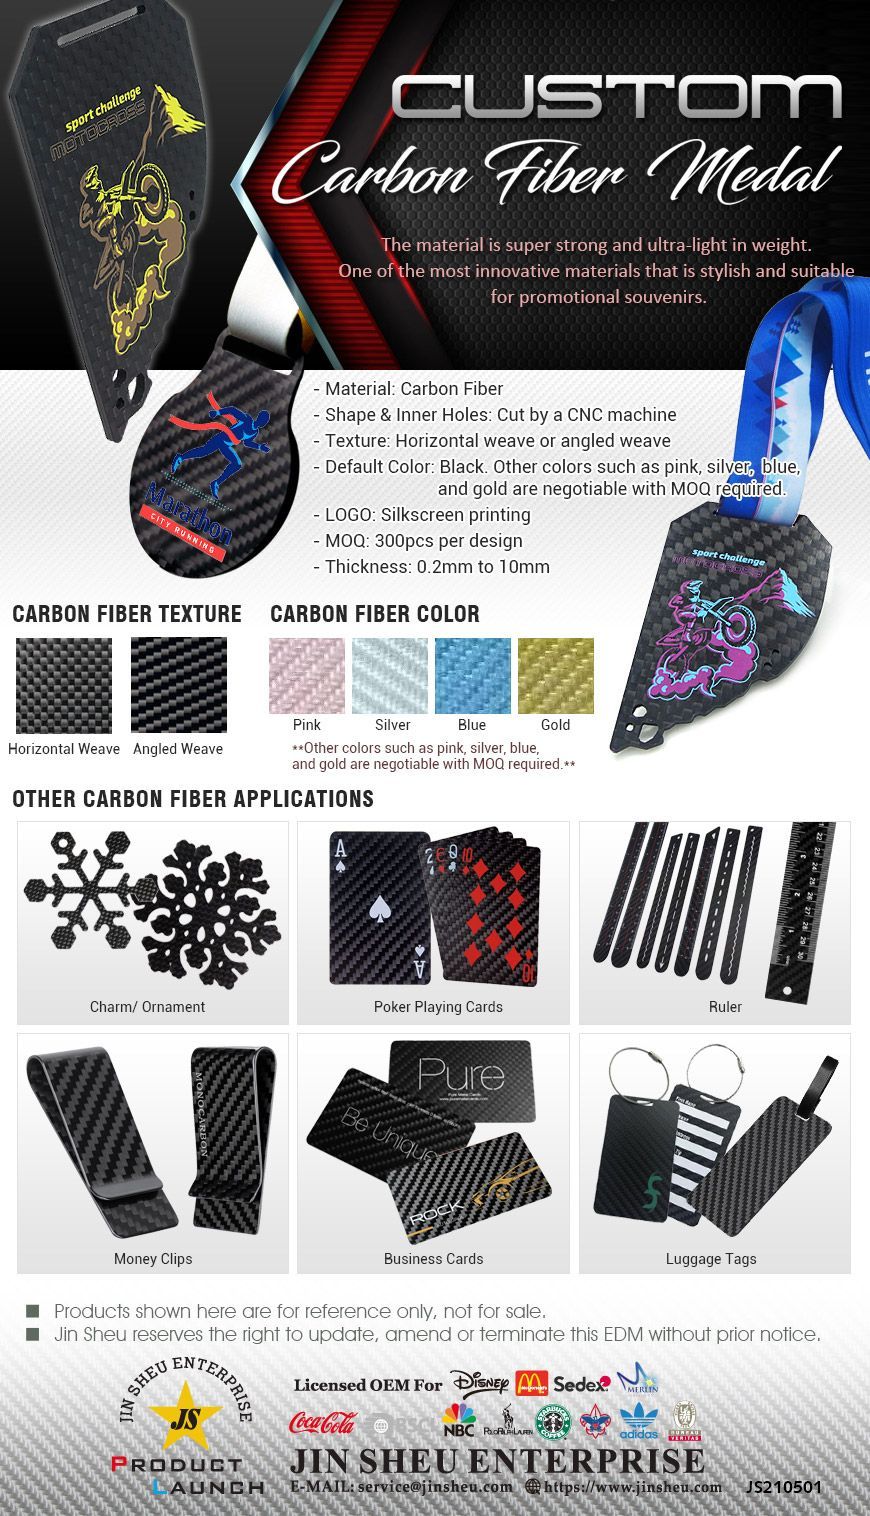 Carbon Fiber that is Professional, Stylish and Sophisticated